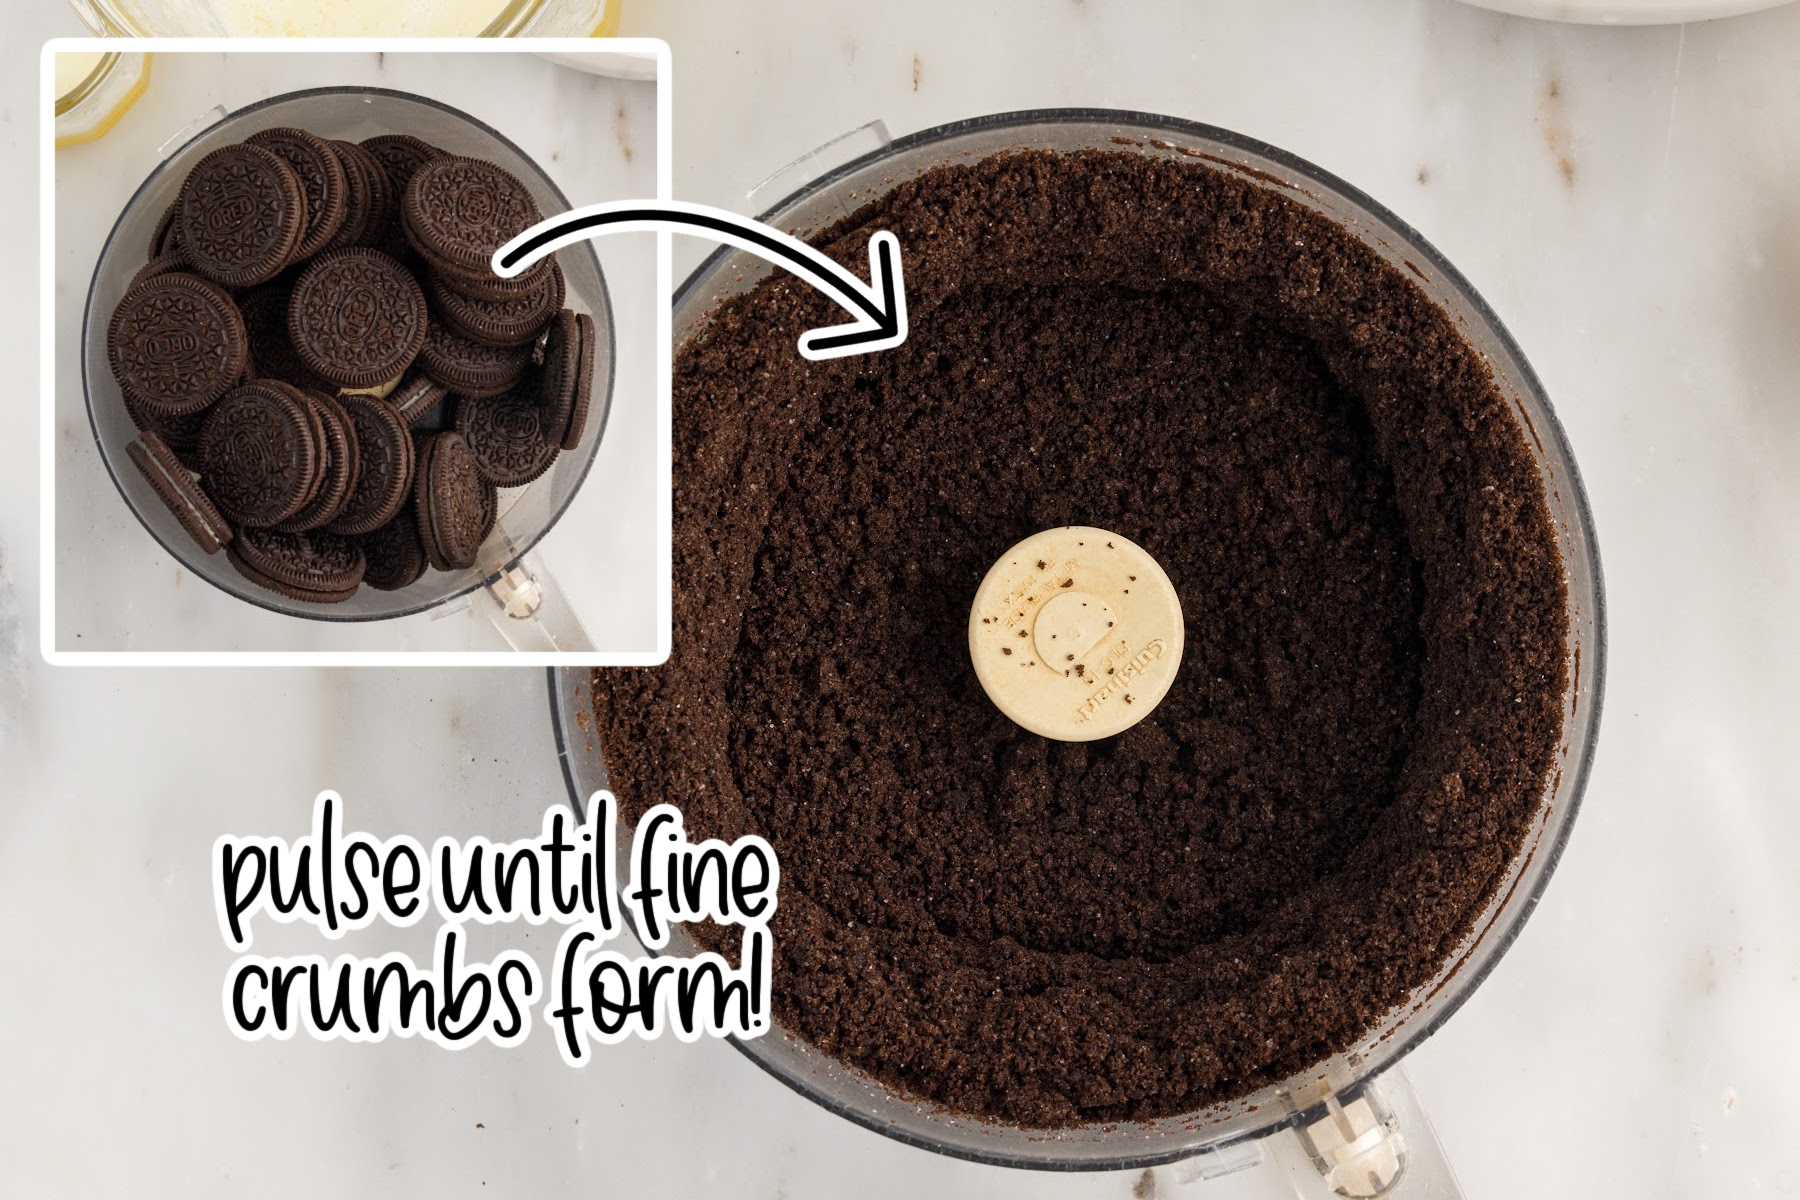 Whole Oreos in a food processor and oreos crushed in a food processor with text overlay.